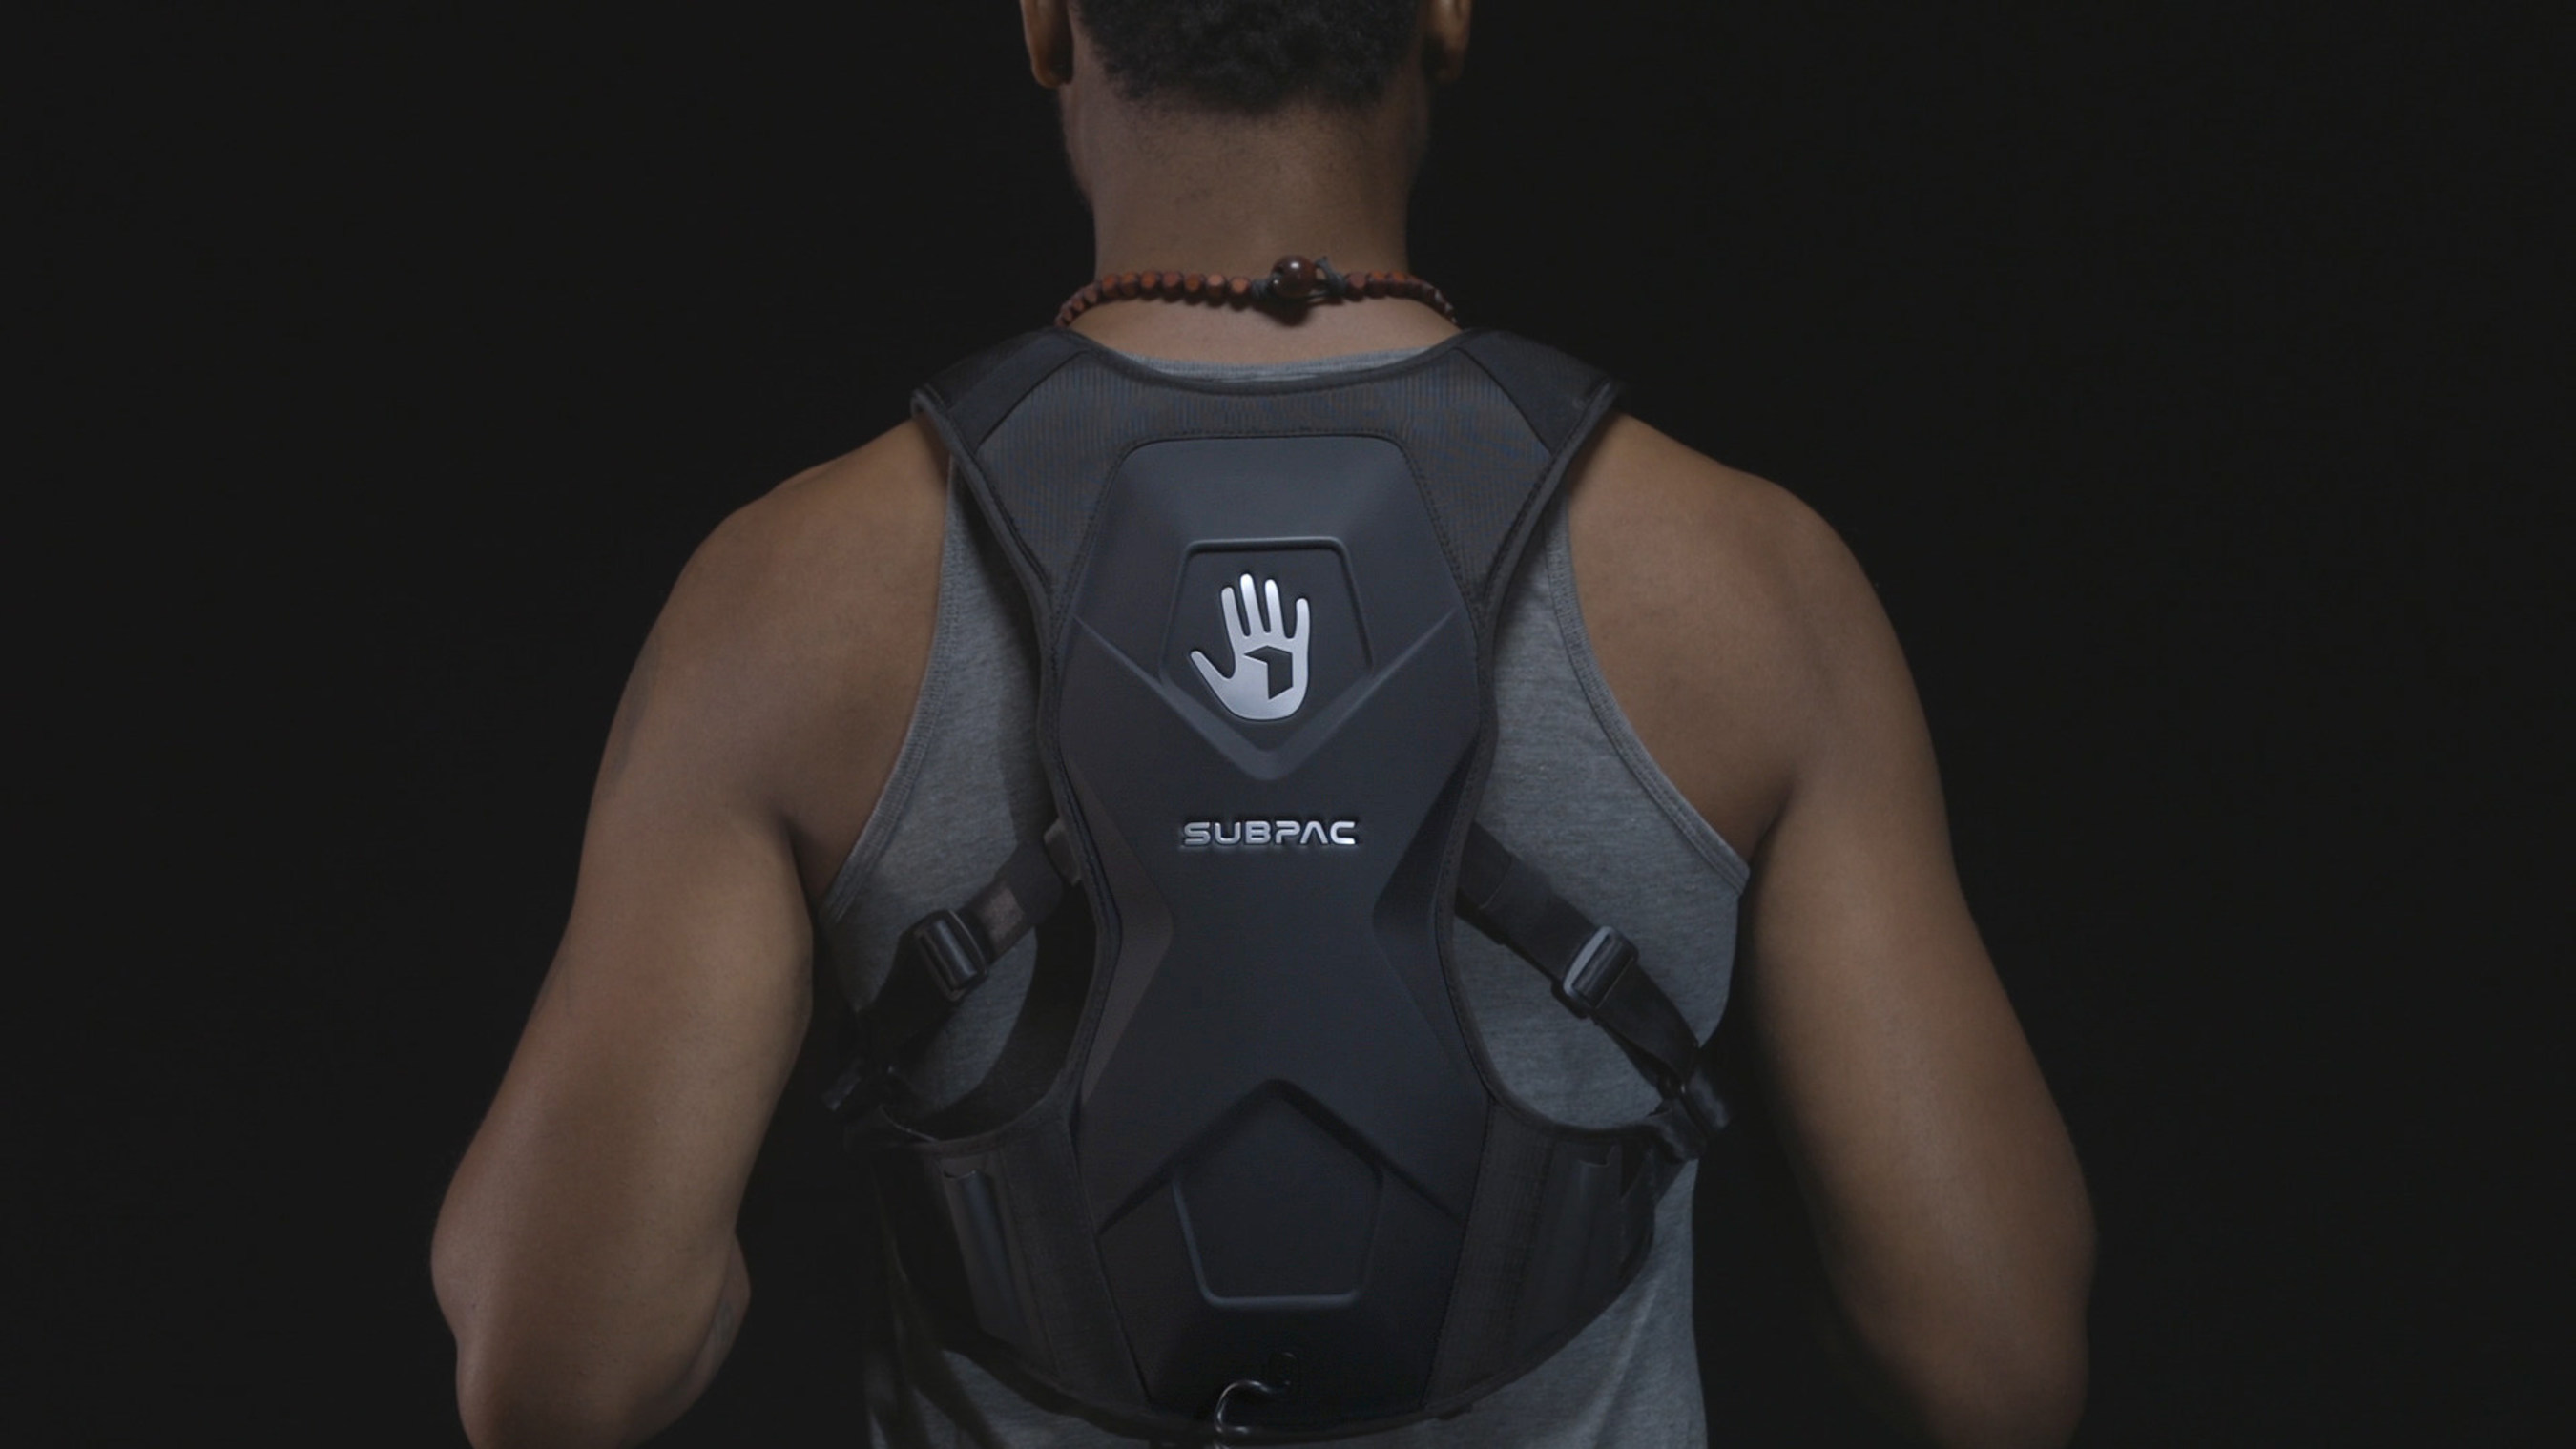 Introducing the SubPac M2, the world's most advanced tactile audio system